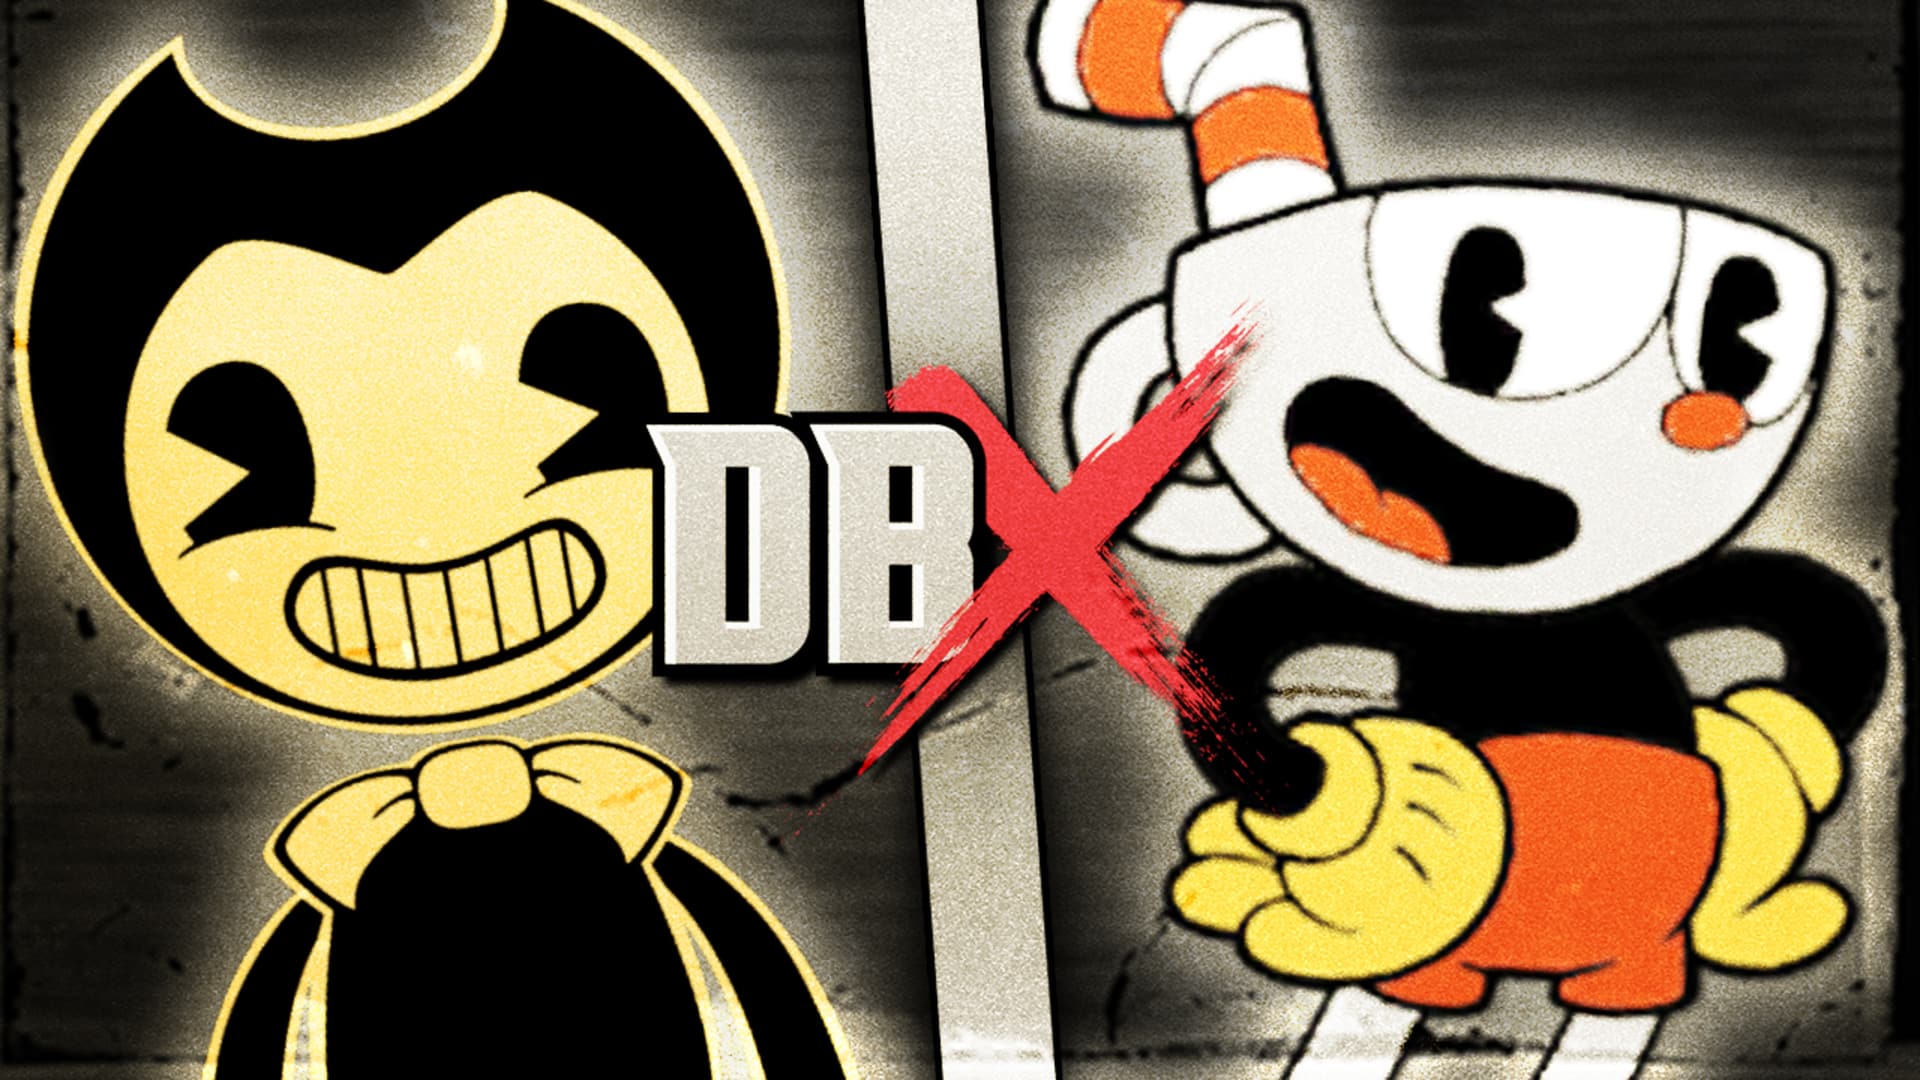 If Bendy was on The Cuphead Show 